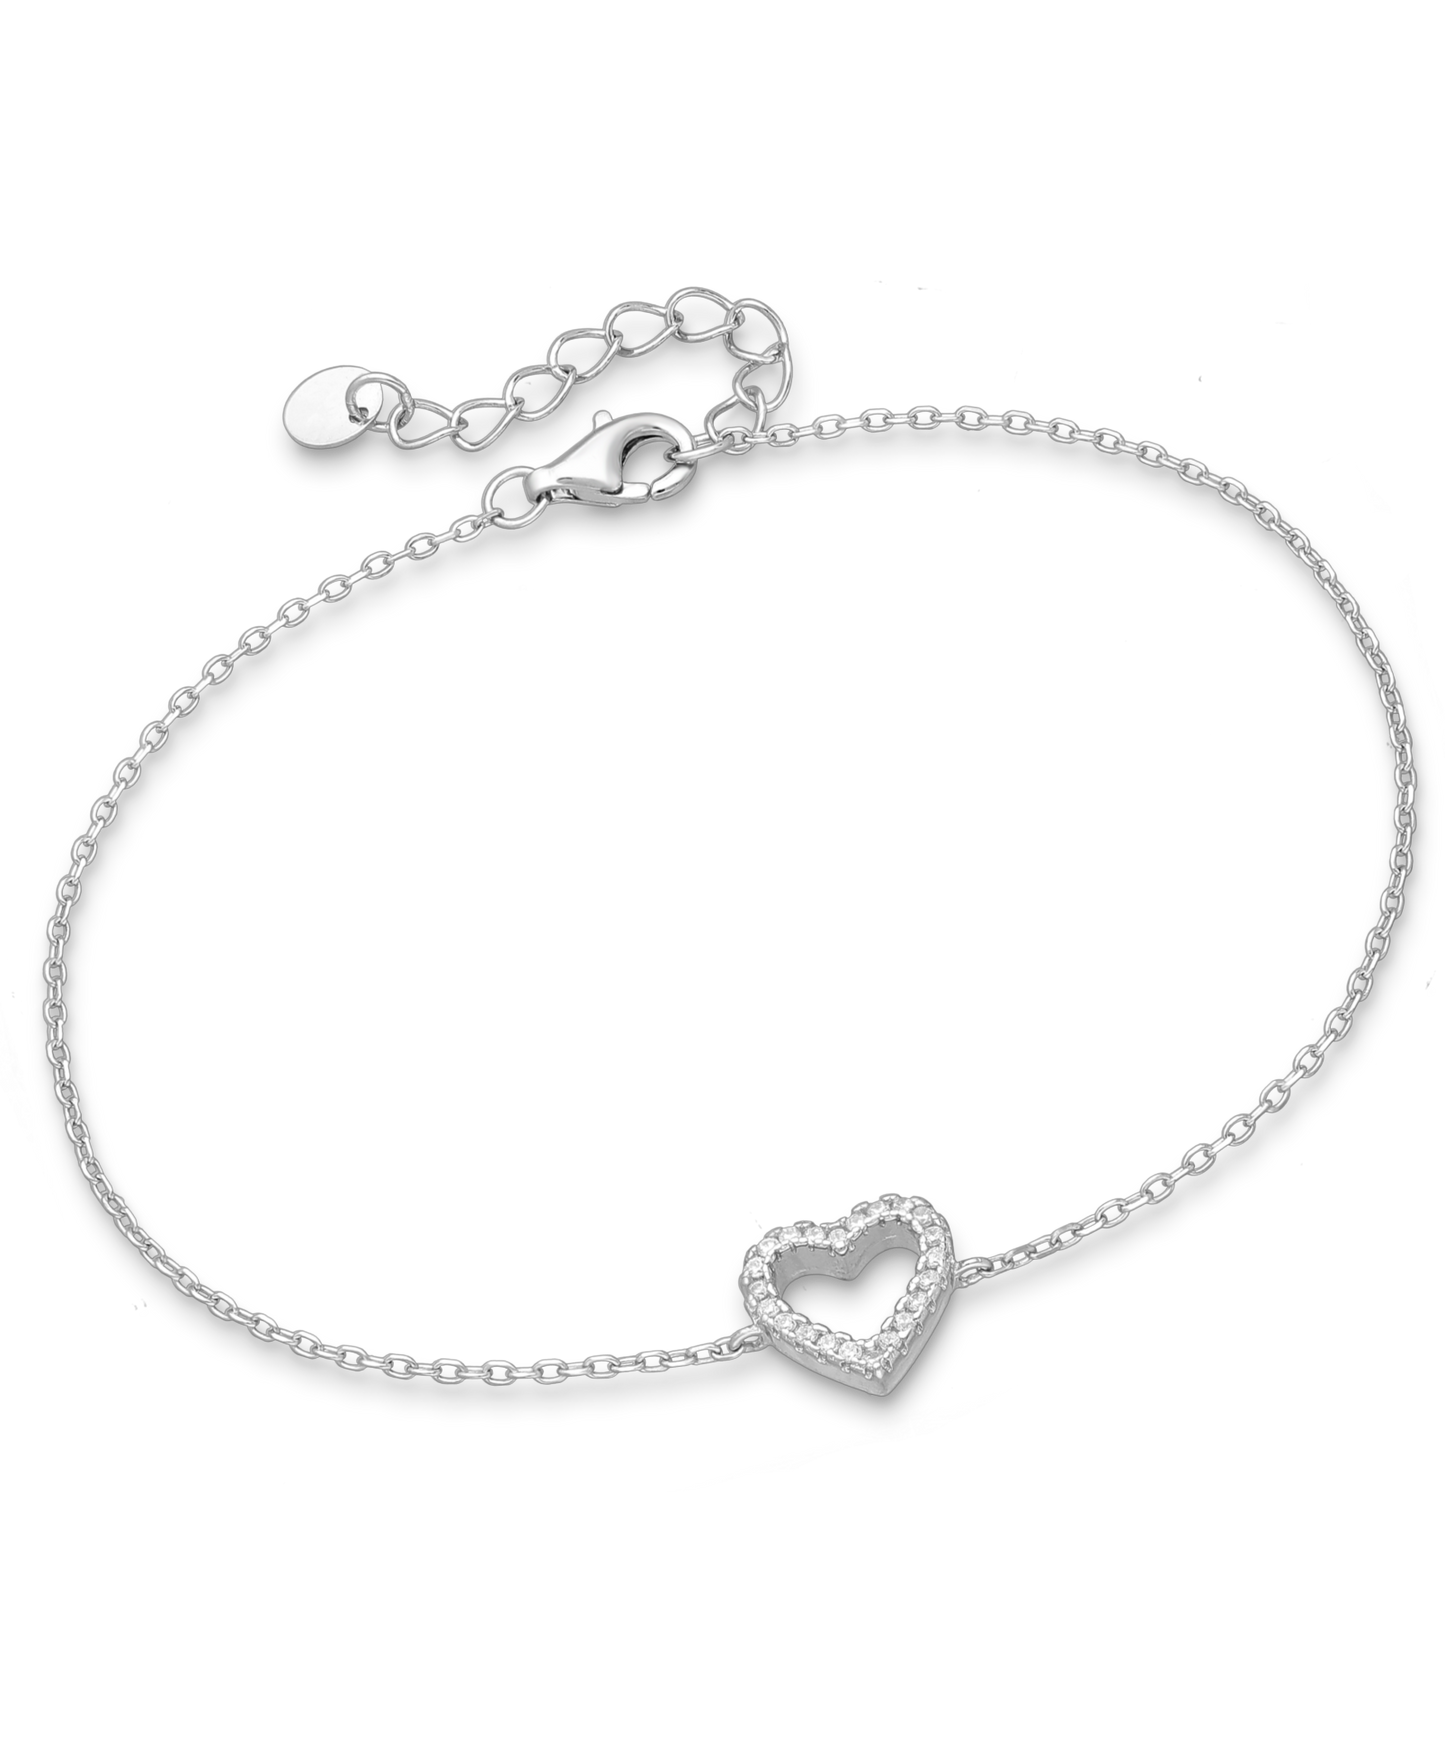 Sterling Silver Heart Bracelet with CZ Simulated Diamonds